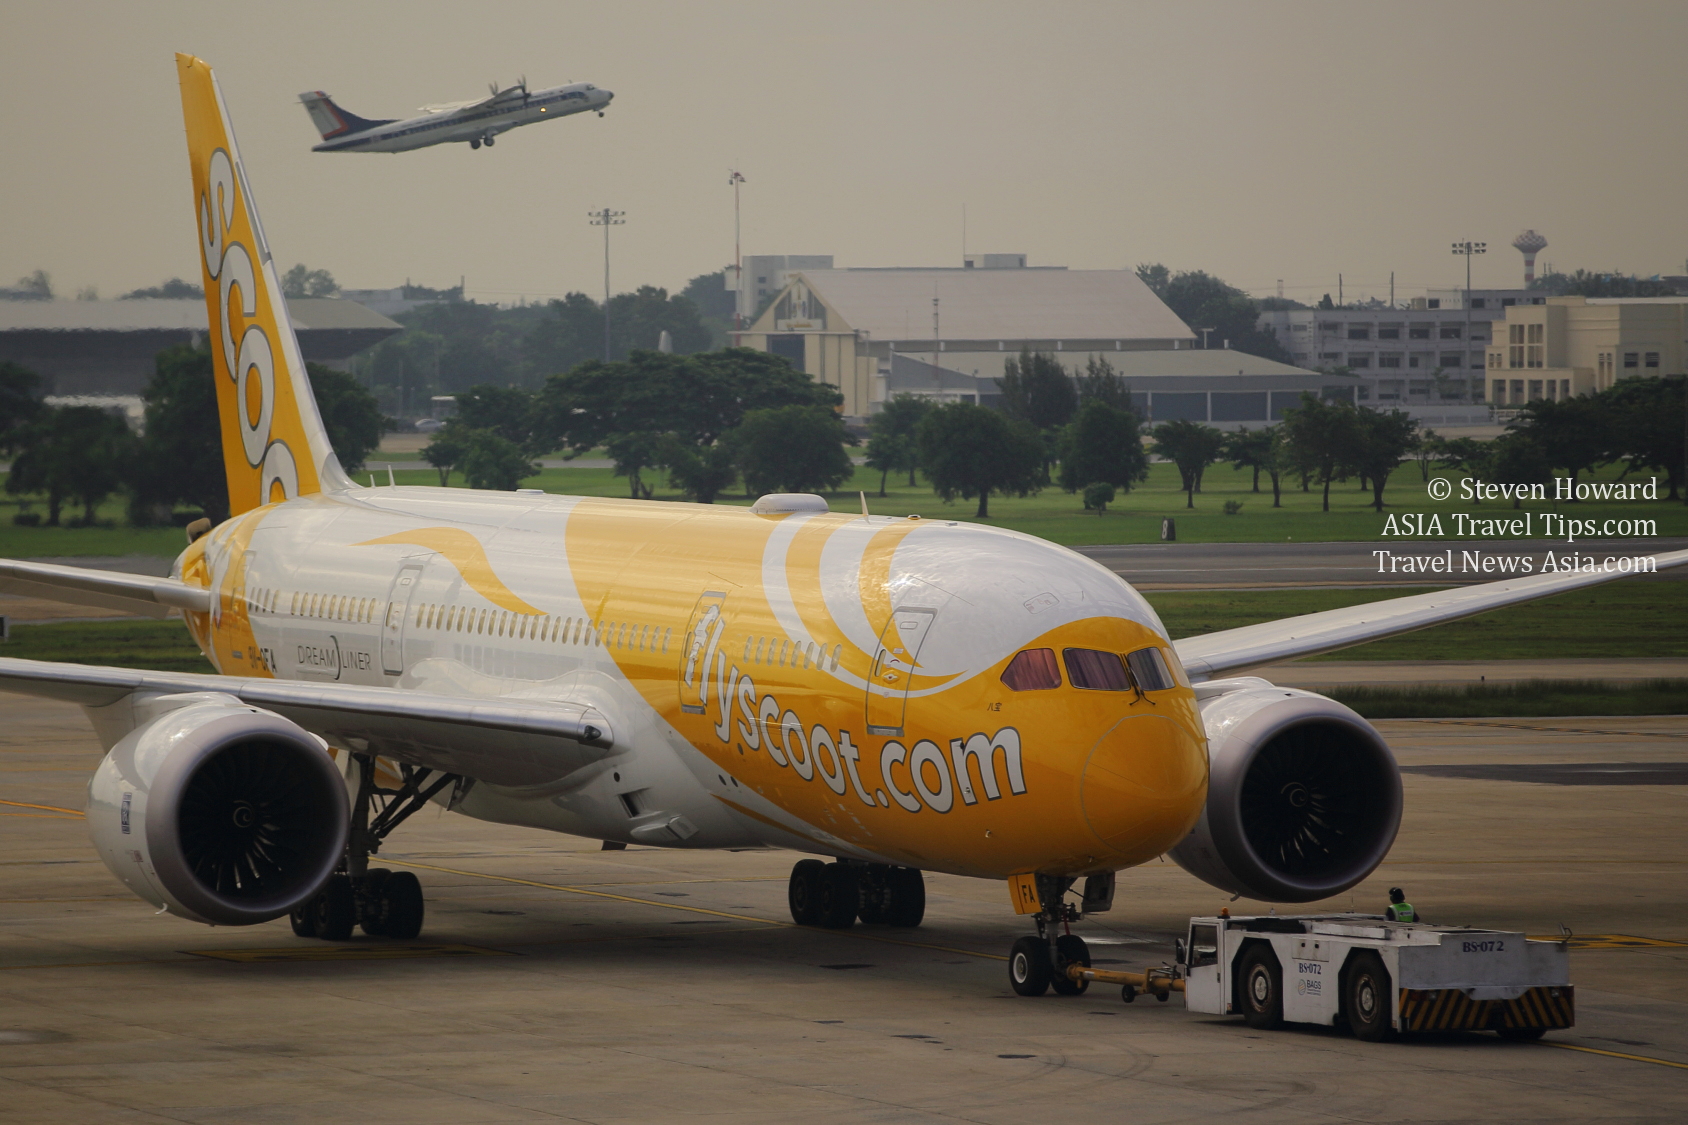 Scoot Boeing 787 Dreamliner at DMK. Picture by Steven Howard of TravelNewsAsia.com Click to enlarge.